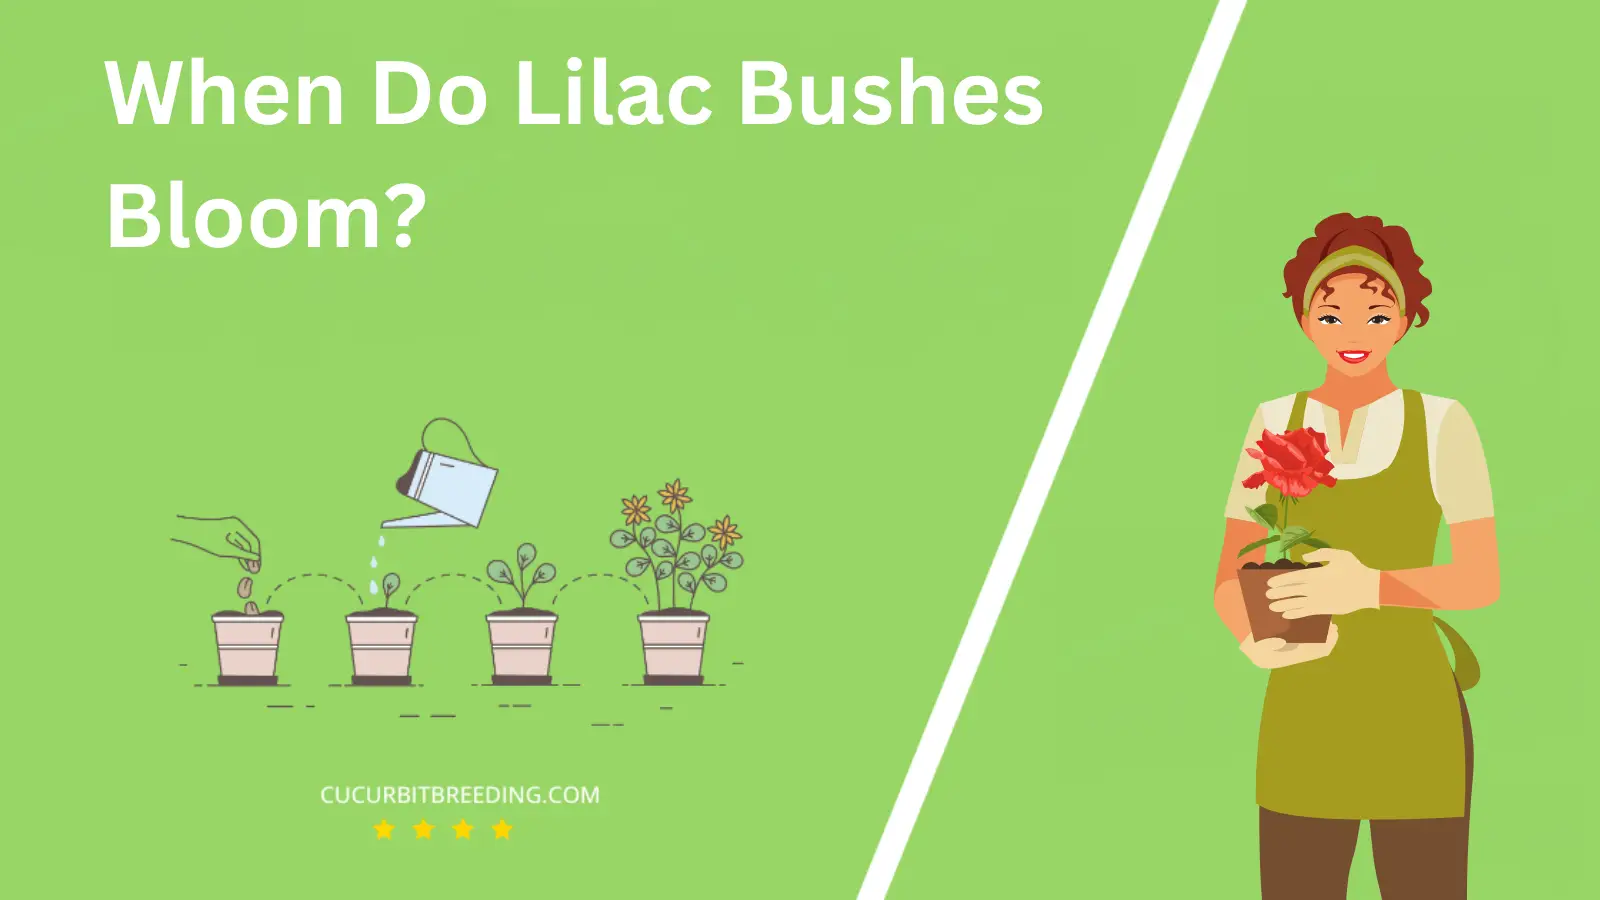 When Do Lilac Bushes Bloom?